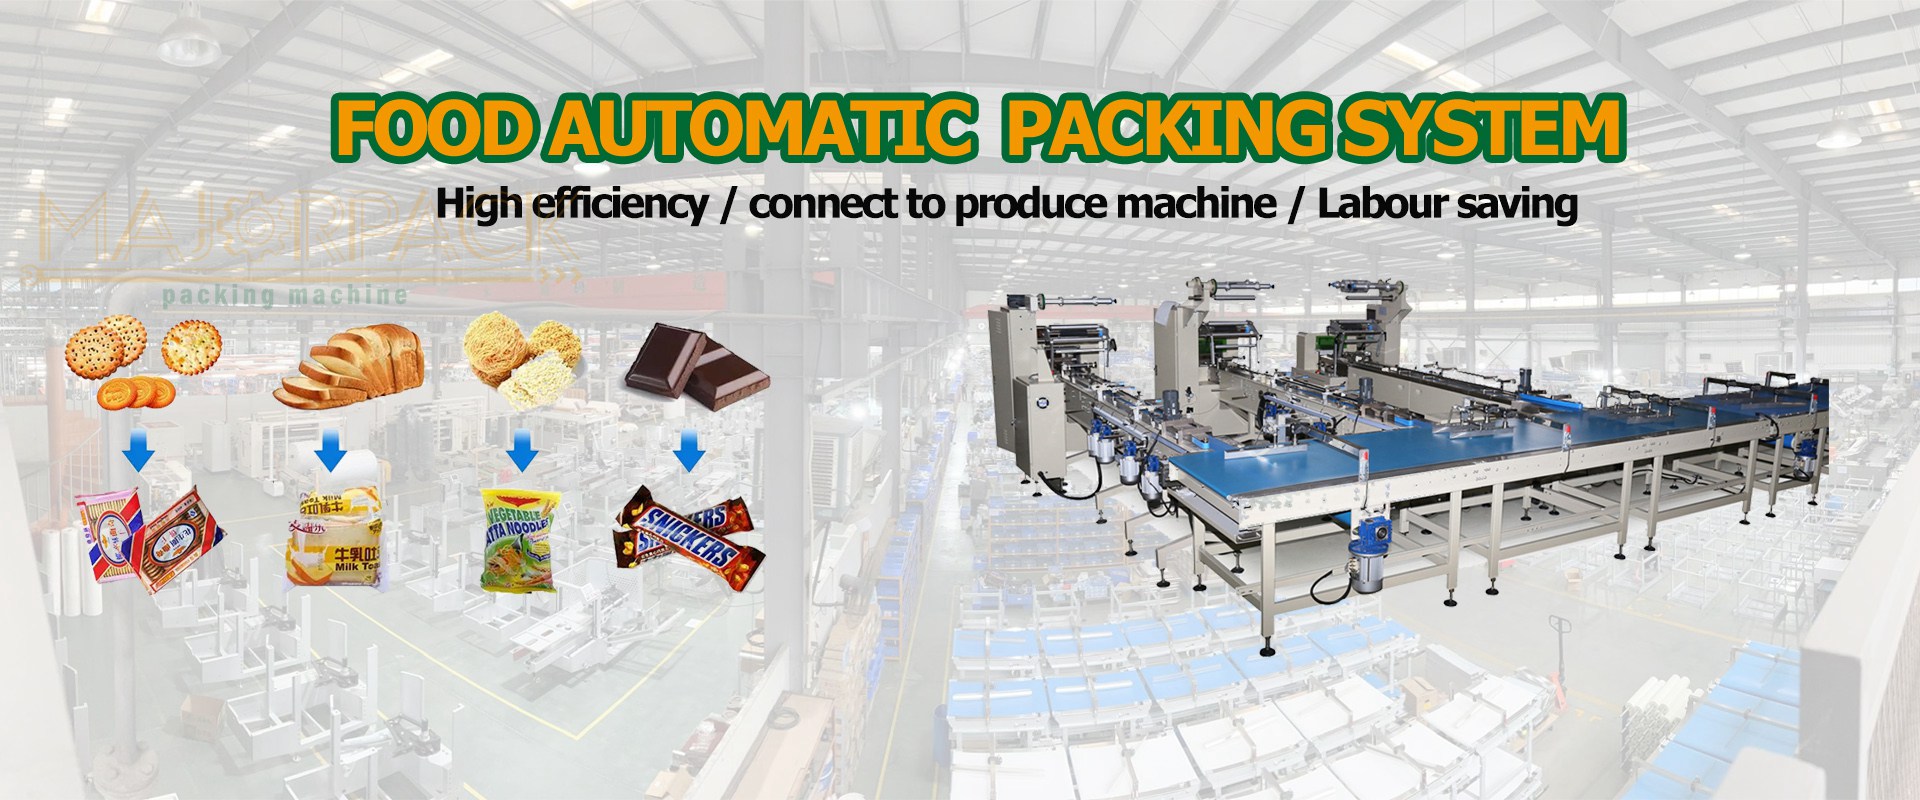 Majorpack-Food automatic feeding and packing system